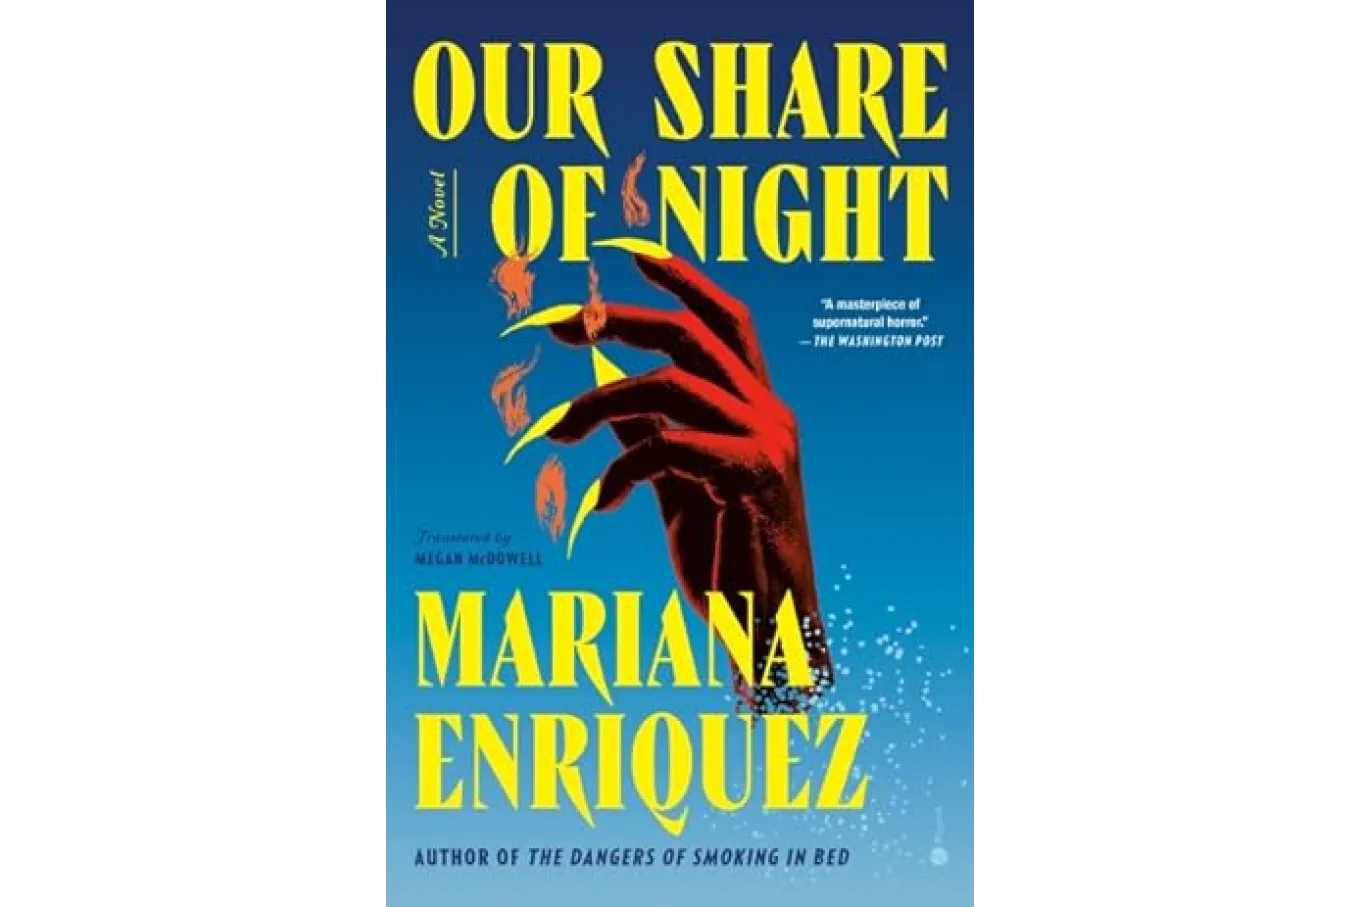 Our Share of Night by Mariana Enriquez 